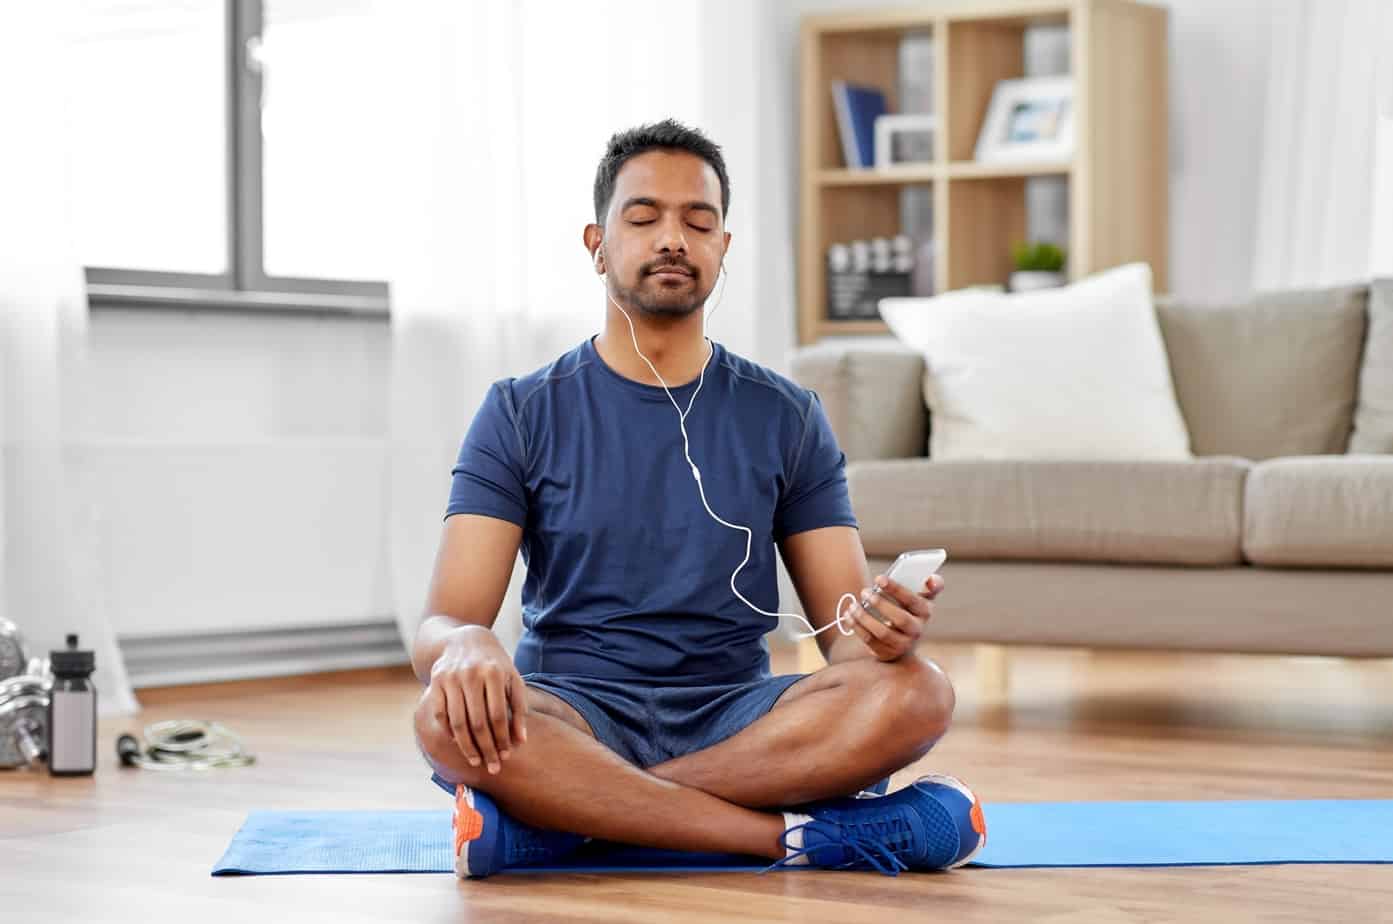 Sports meditation can help some athletes improve their performance.